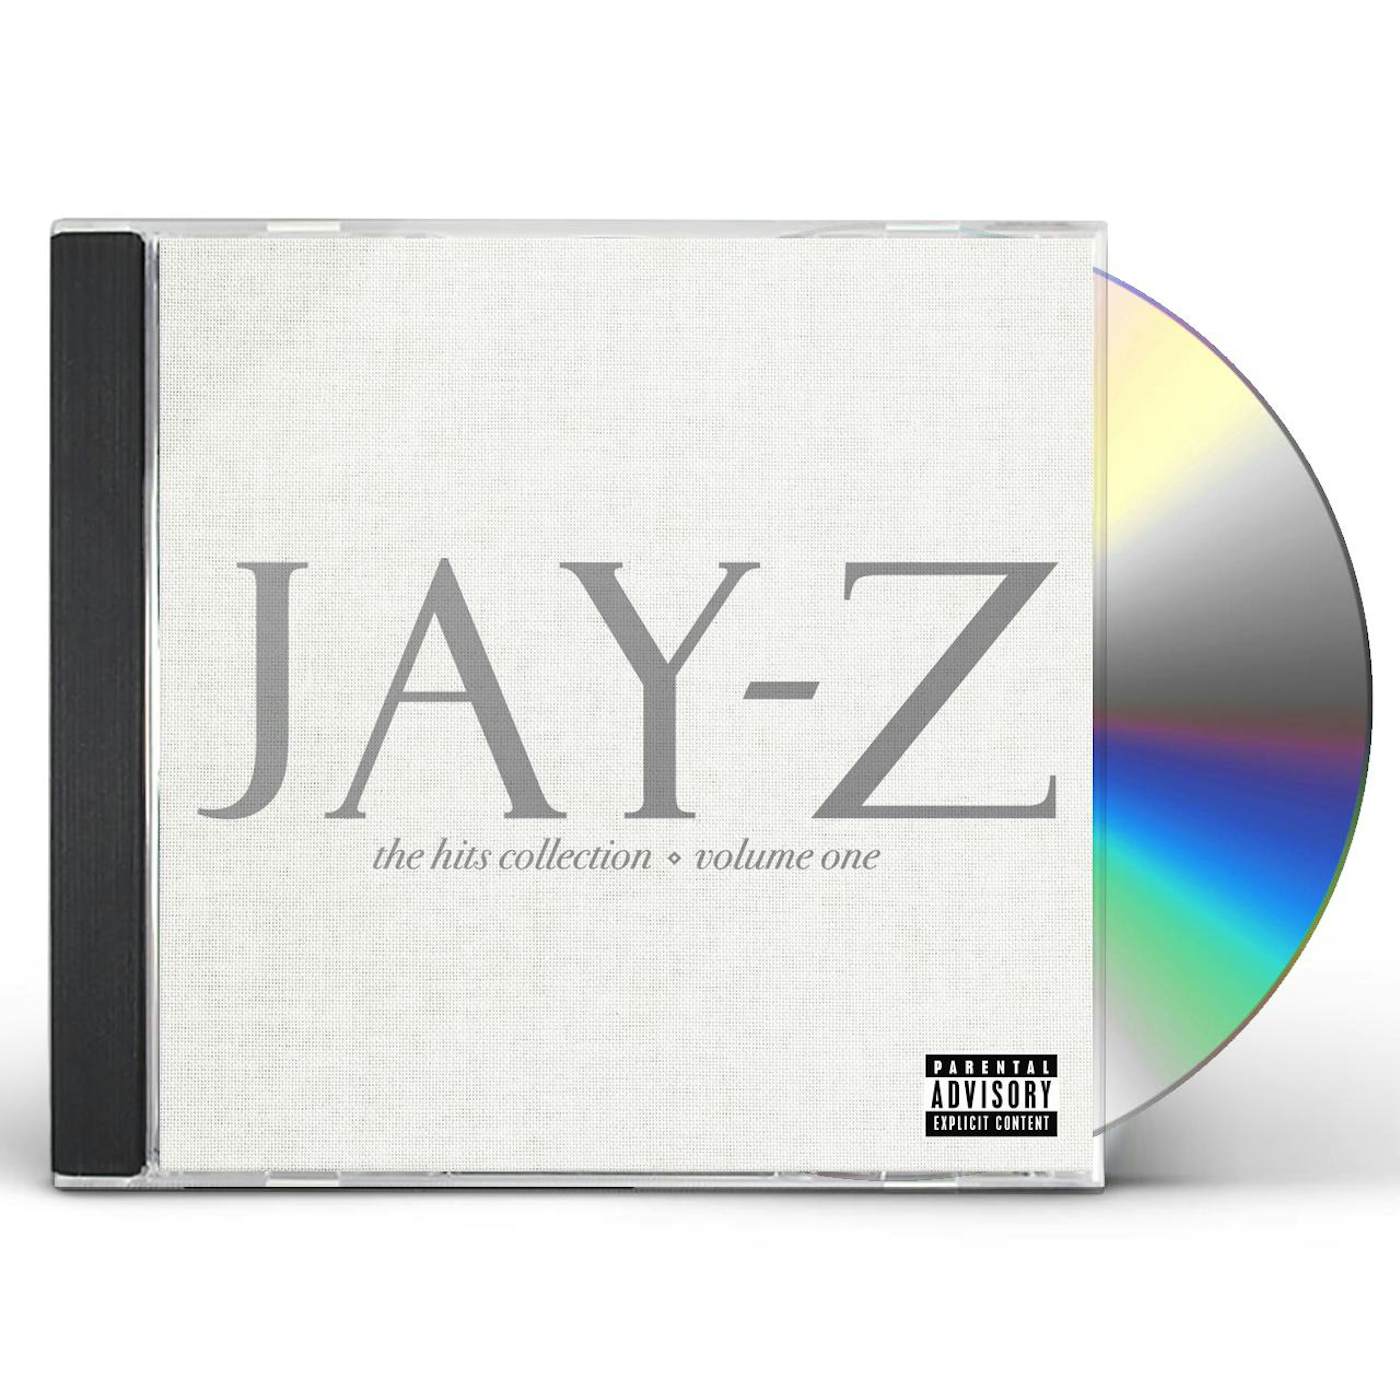 JAY-Z HITS COLLECTION 1 CD